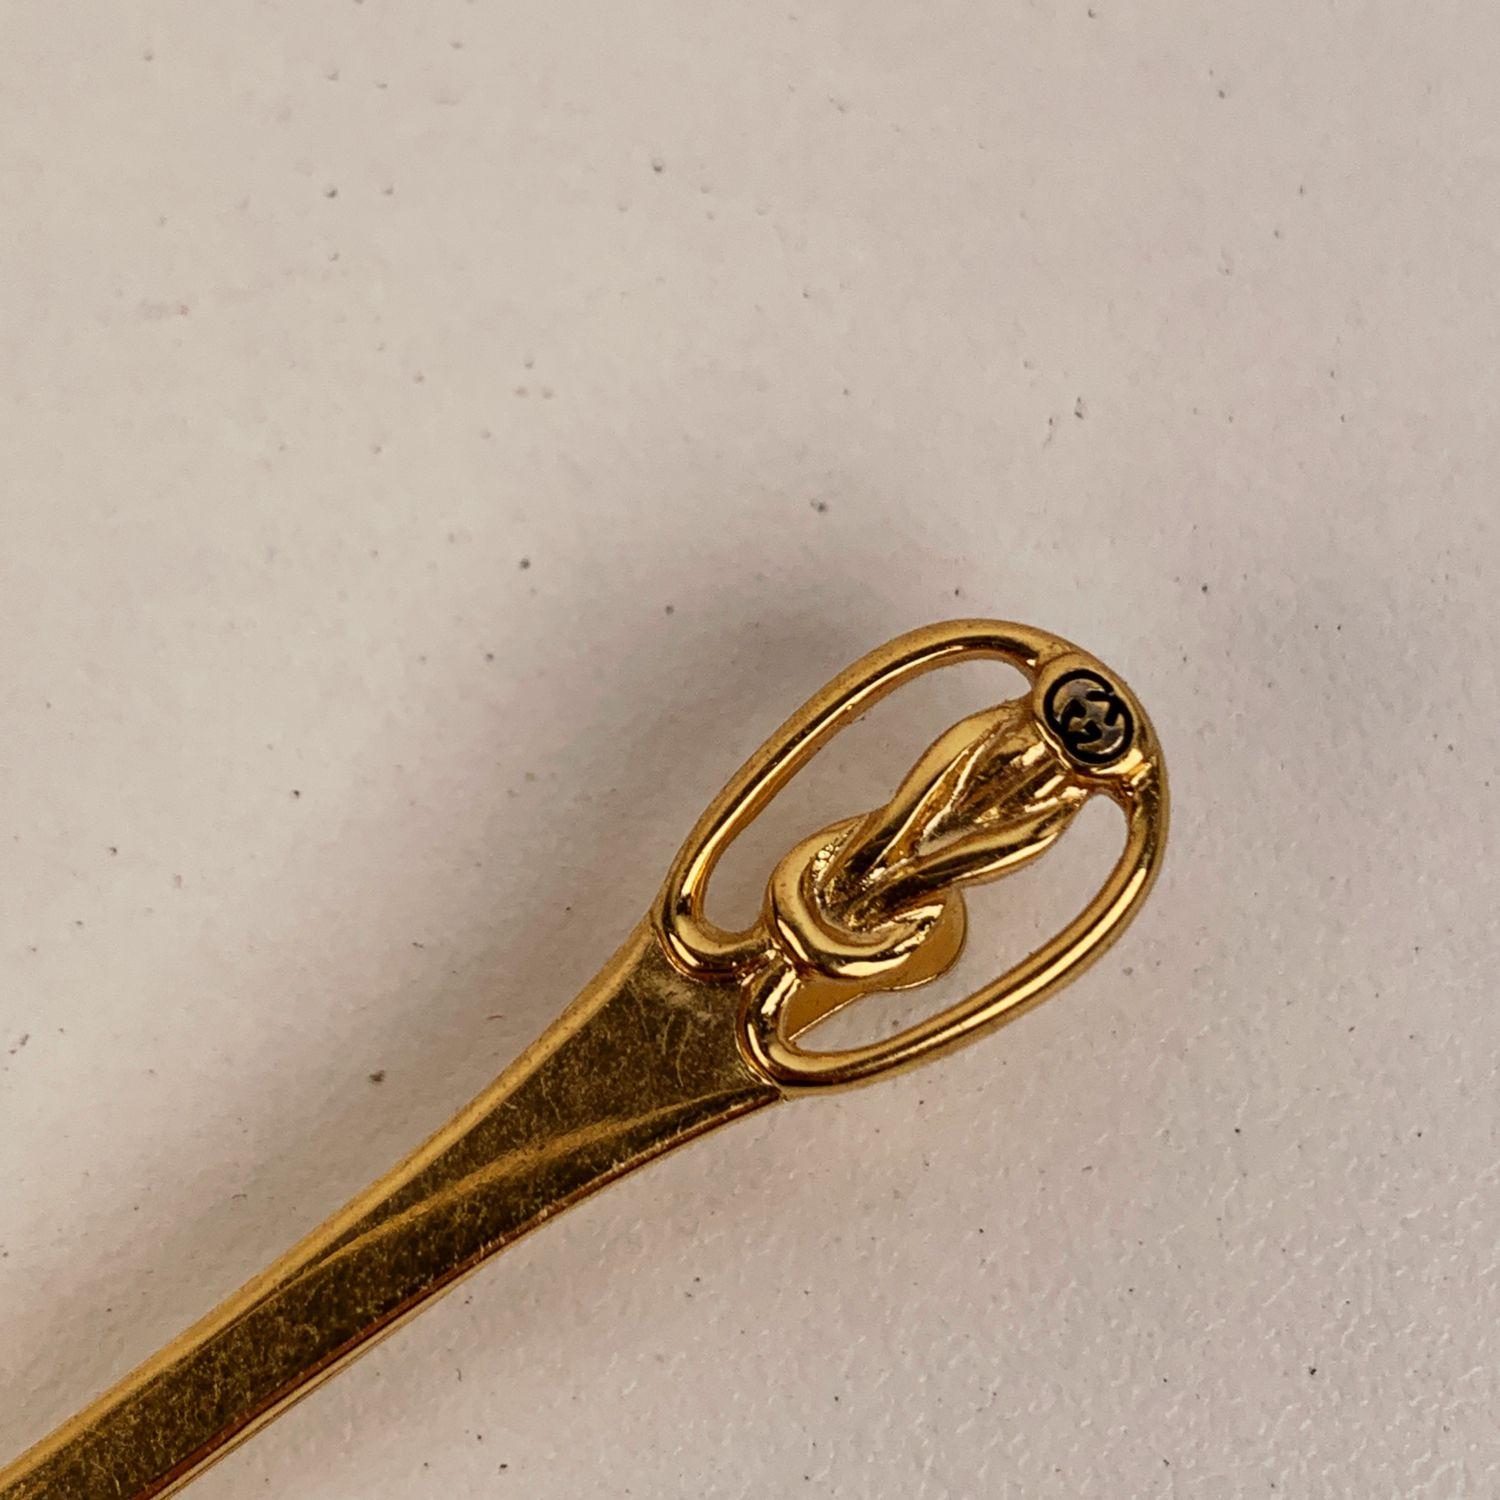 Vintage GUCCI tie clip with knot detailing and GG logo. It can be used also as a money clip. In gold metal. Marked 'Gucci Parf. Italy' on the reverse. Length: 2 inches - 5,1 cm. Period / Era: ca 1980

Details

MATERIAL: Metal

COLOR: Gold

MODEL: